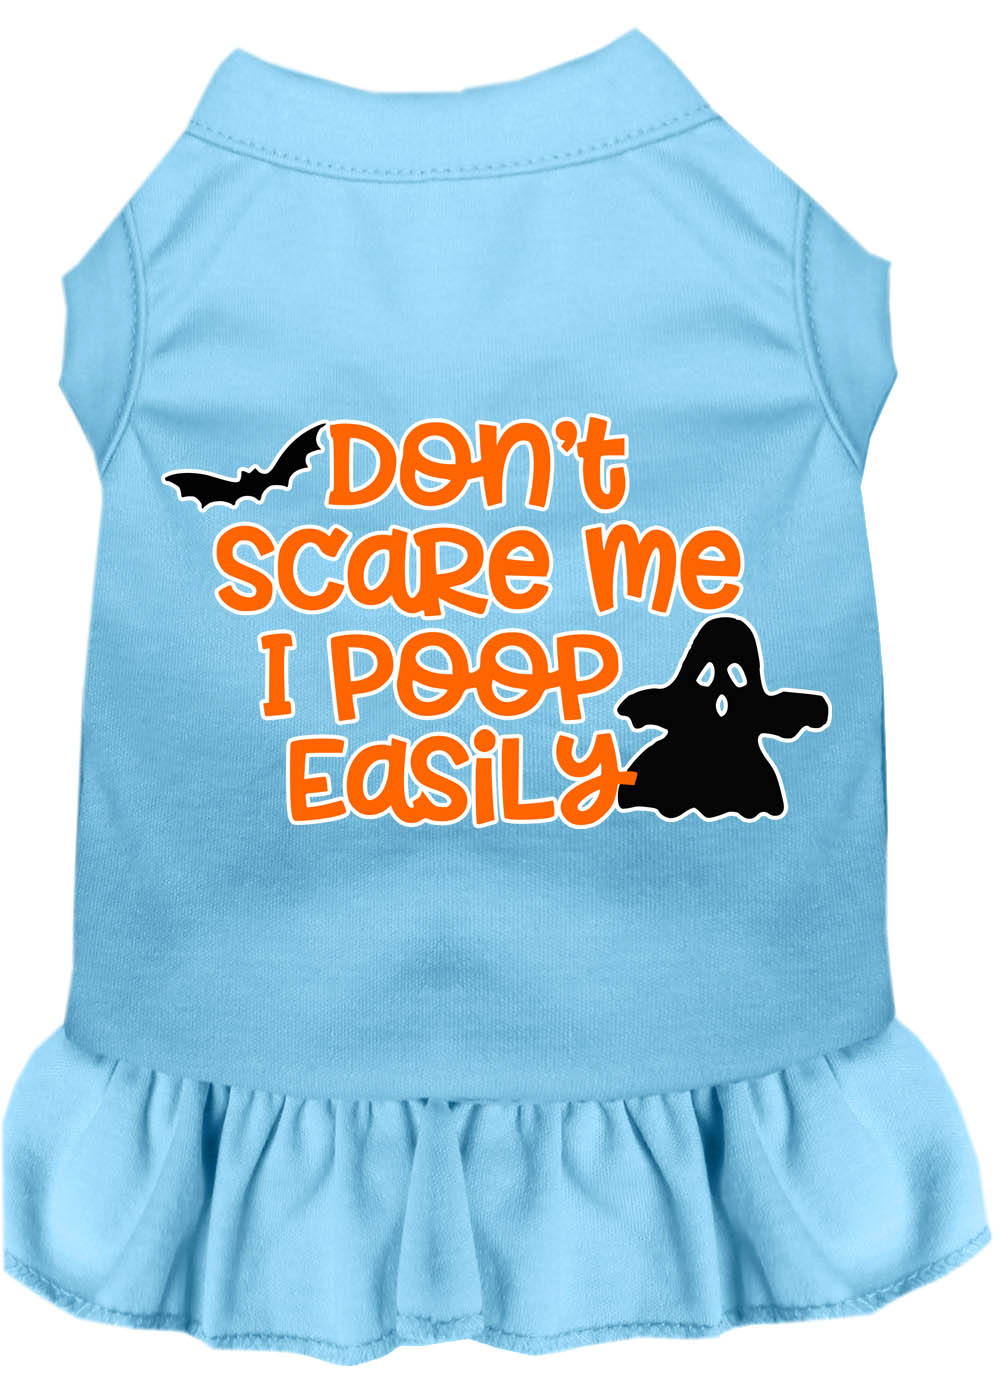 Don't Scare Me, Poops Easily Screen Print Dog Dress Baby Blue Sm